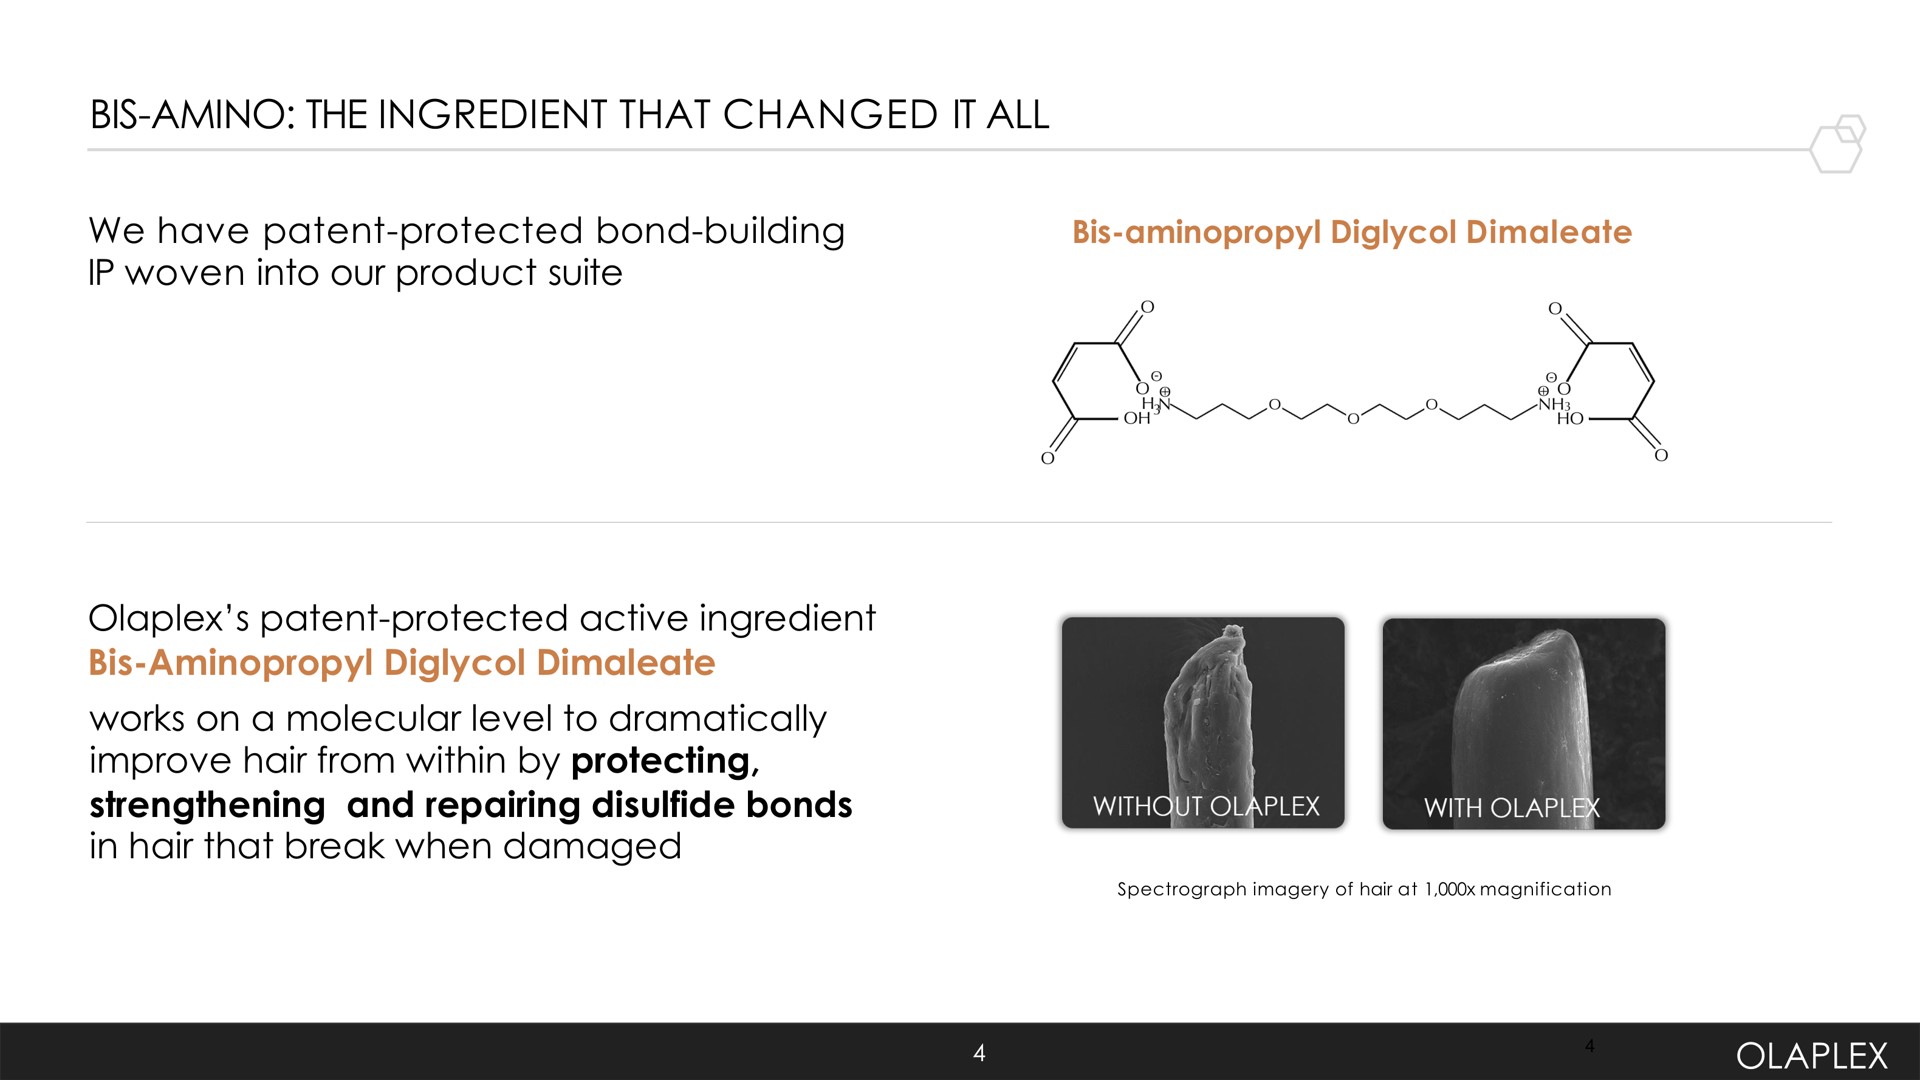 bis amino the ingredient that changed it all we have patent protected bond building woven into our product suite patent protected active ingredient bis works on a molecular level to dramatically improve hair from within by protecting strengthening and repairing bonds in hair that break when damaged i | Olaplex